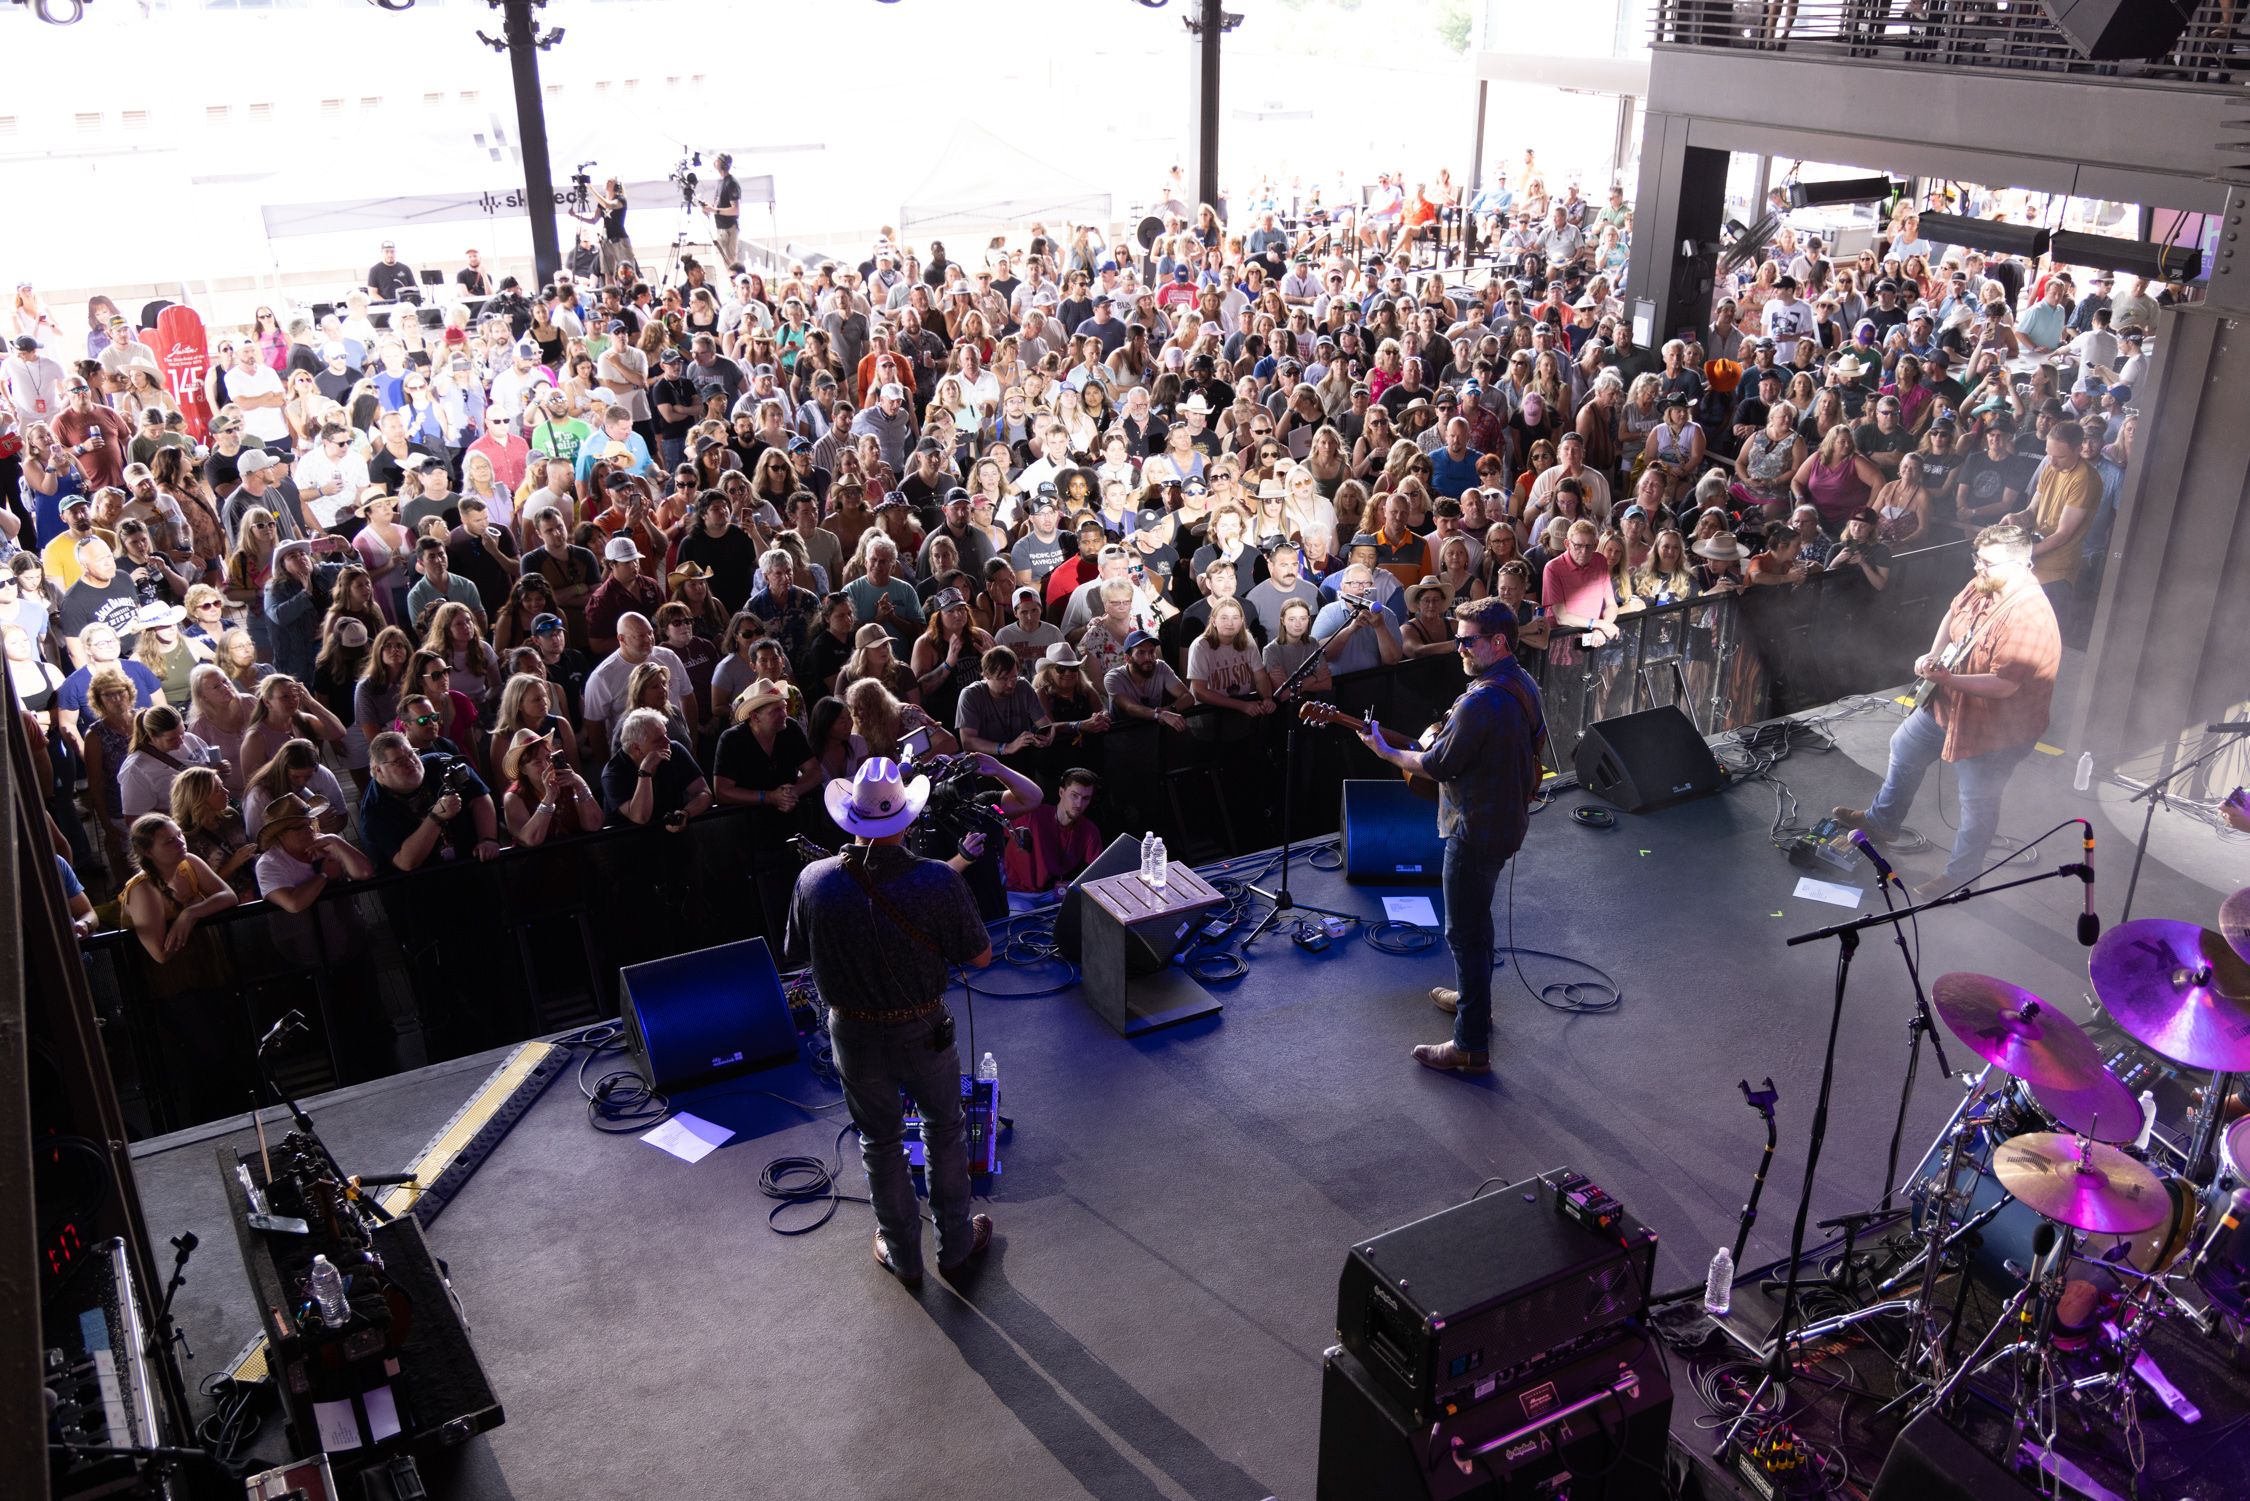 UMG NASHVILLE TAKEOVER AT SKYDECK ON BROADWAY WRAPS FOUR DAYS OF LIVE PERFORMANCES AND EXCLUSIVE FAN EVENTS WITH 25 ARTISTS AND OVER 40 EVENTS